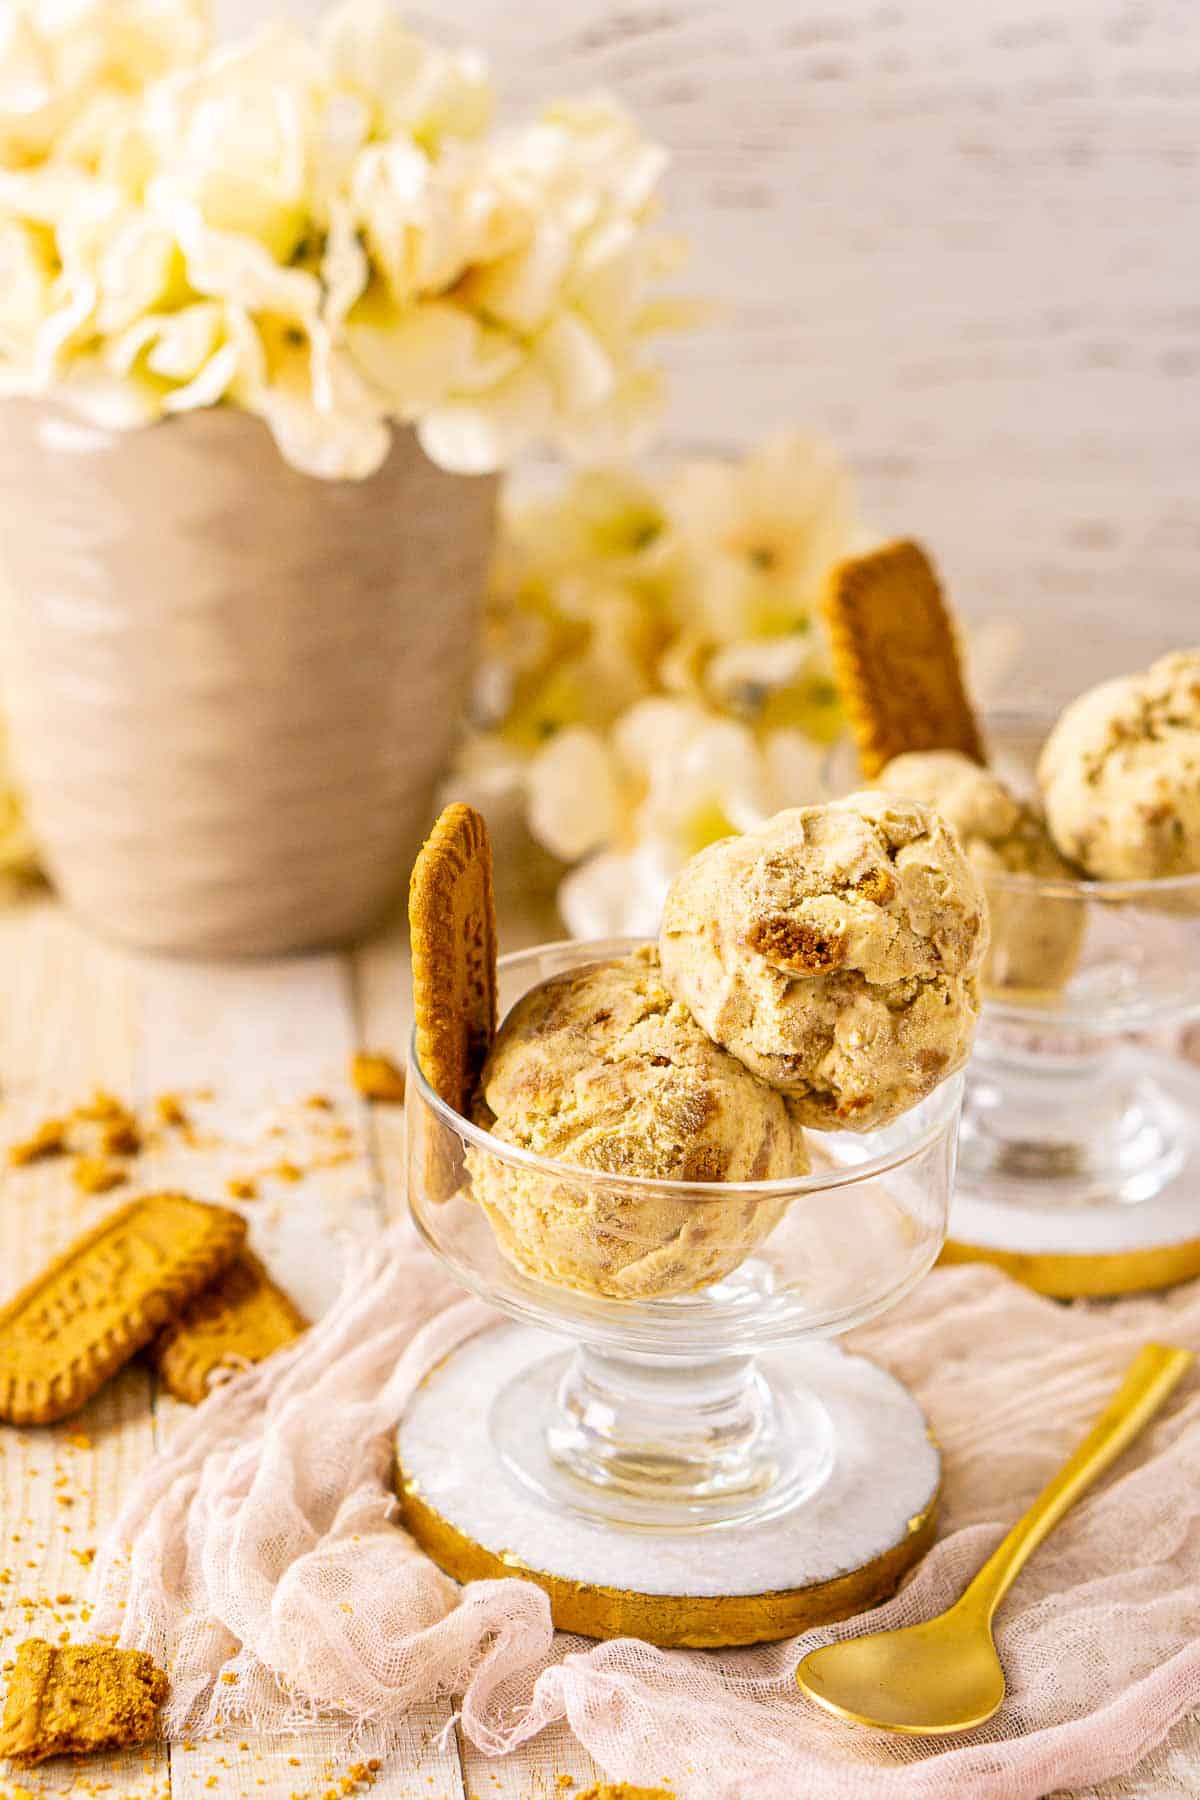 A side view of the Biscoff ice cream with a gold spoon to the right and white flowers in the background.